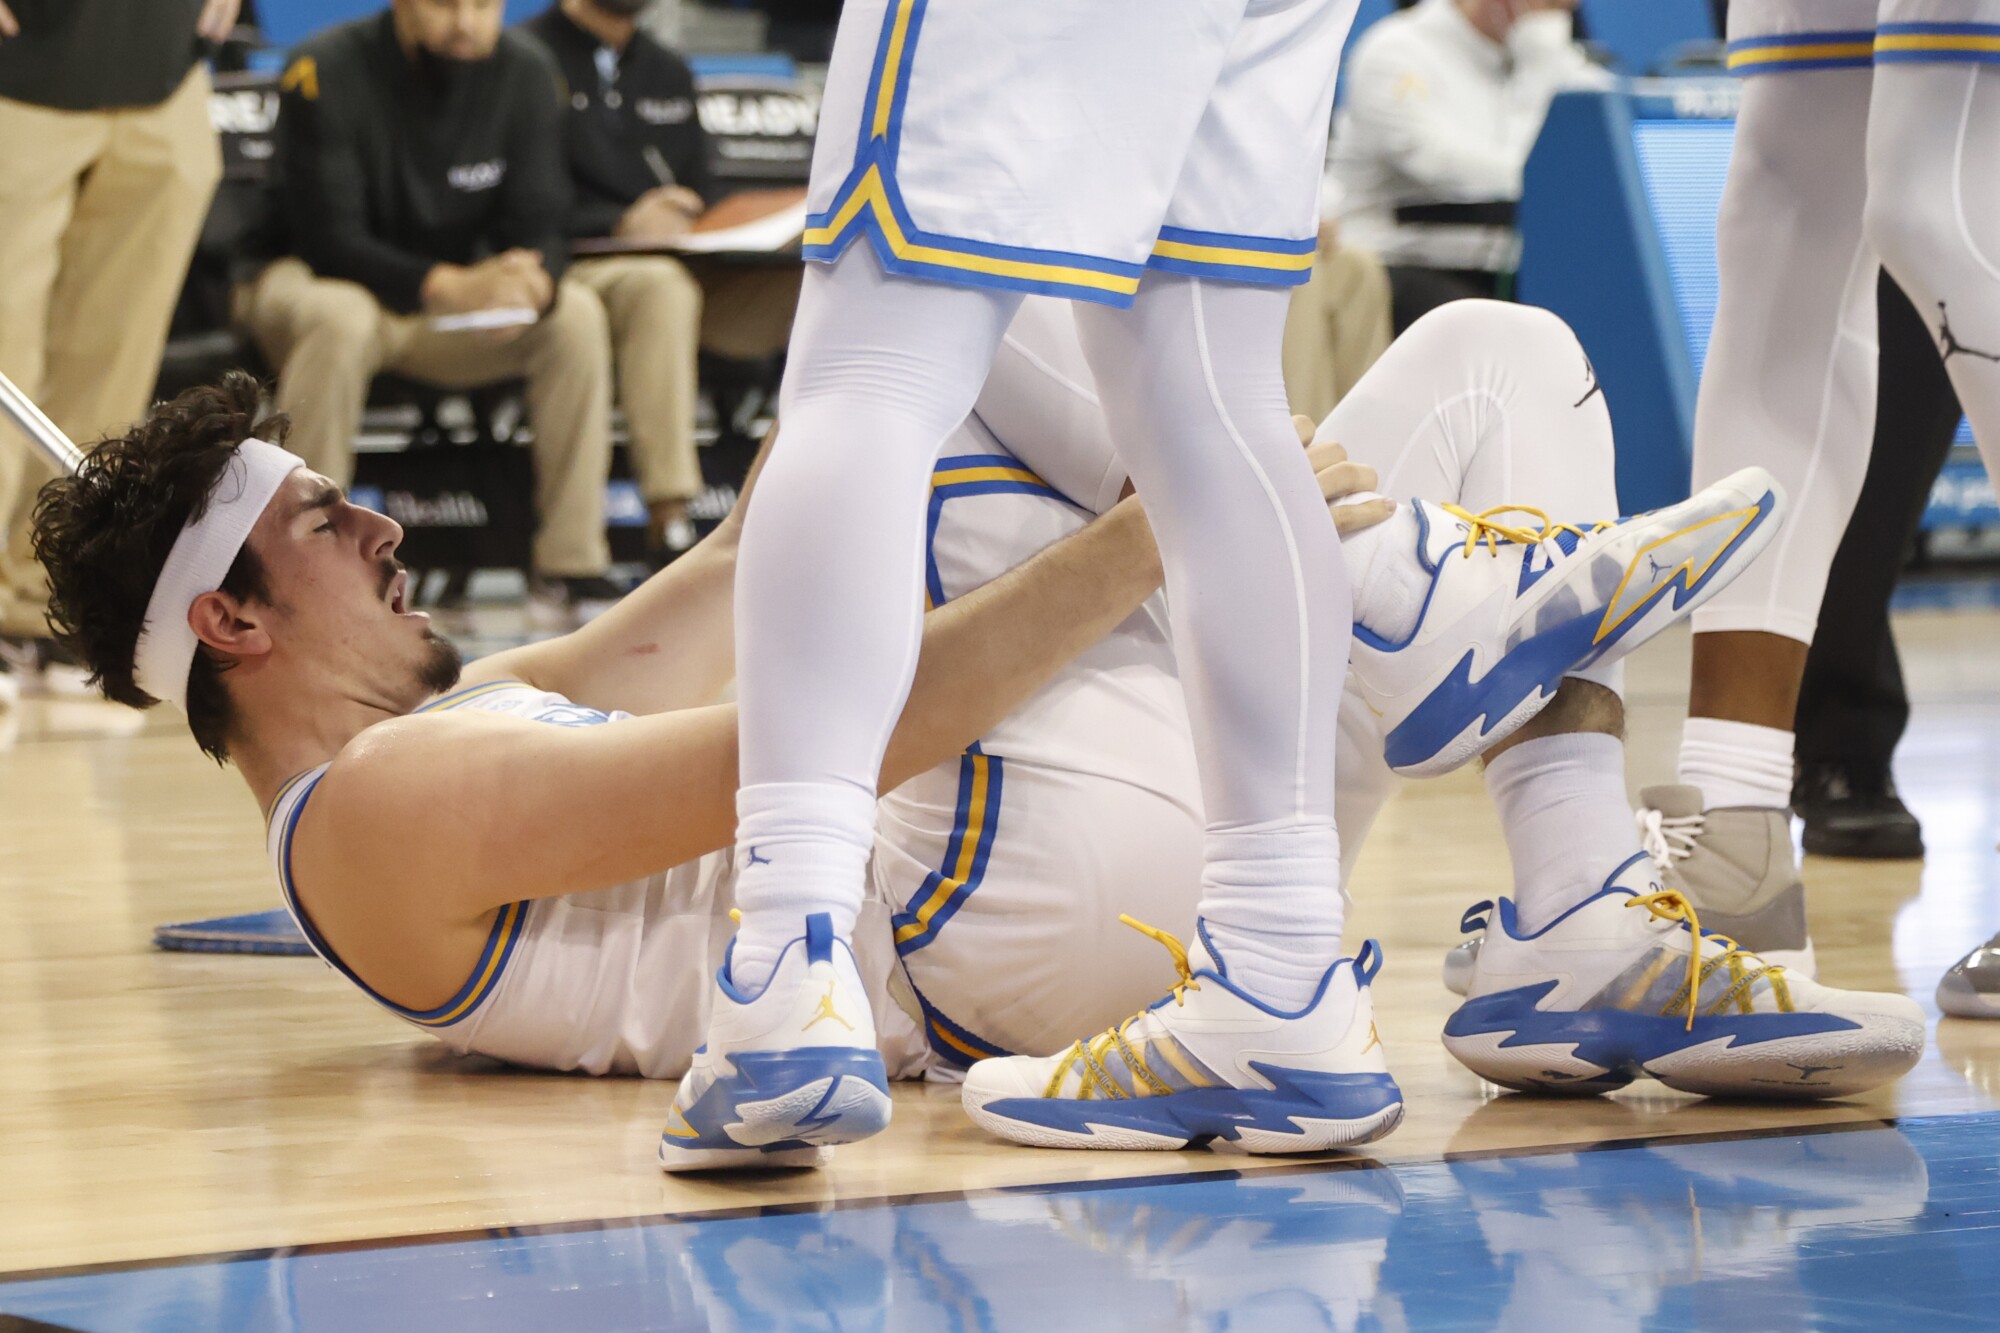 UCLA guard Jaime Jaquez Jr. holds his ankle after tumbling to the court against Long Beach State on Jan. 6.